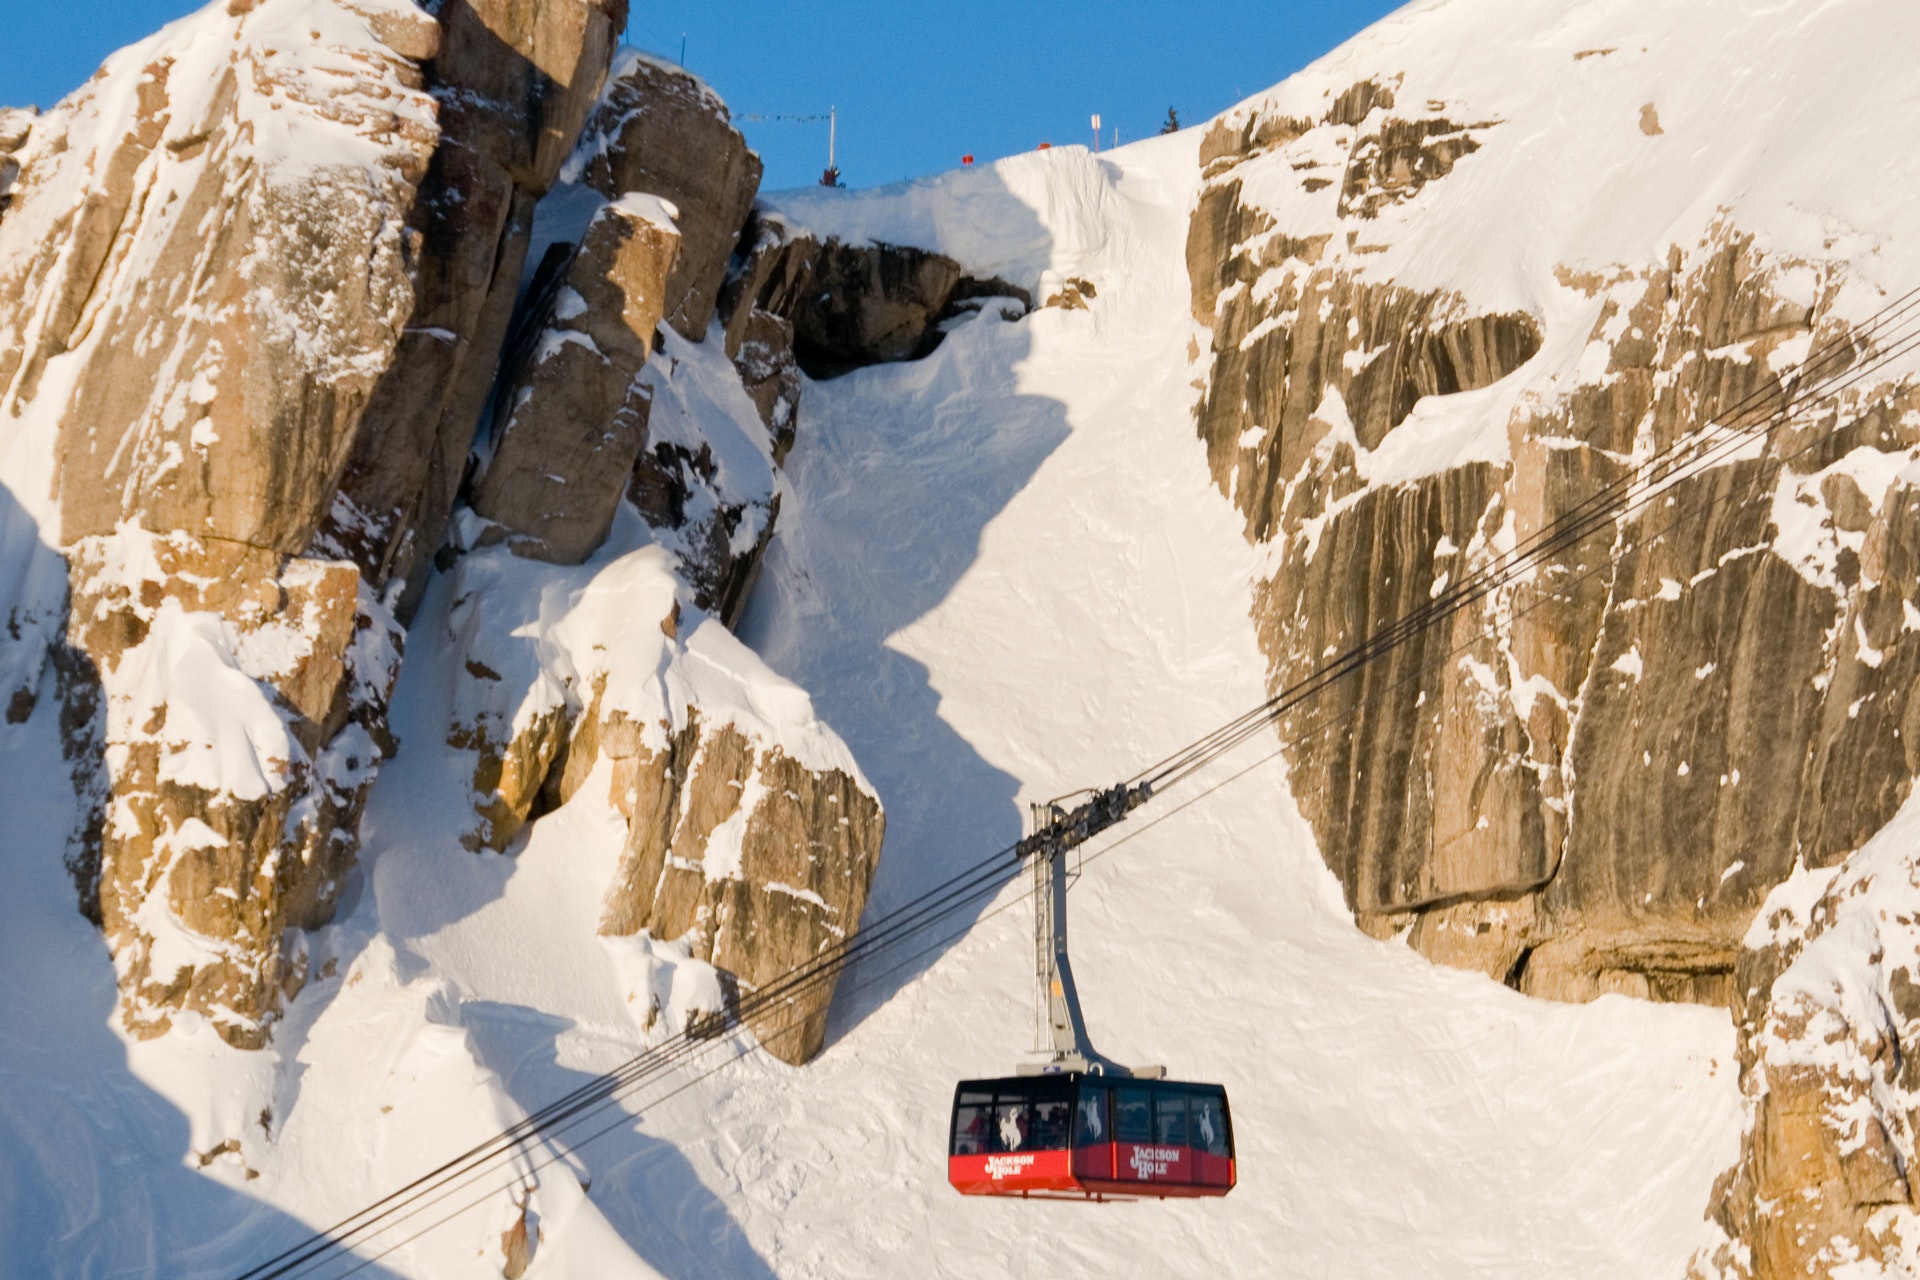 The tram and Corbet's Couloir JHMR